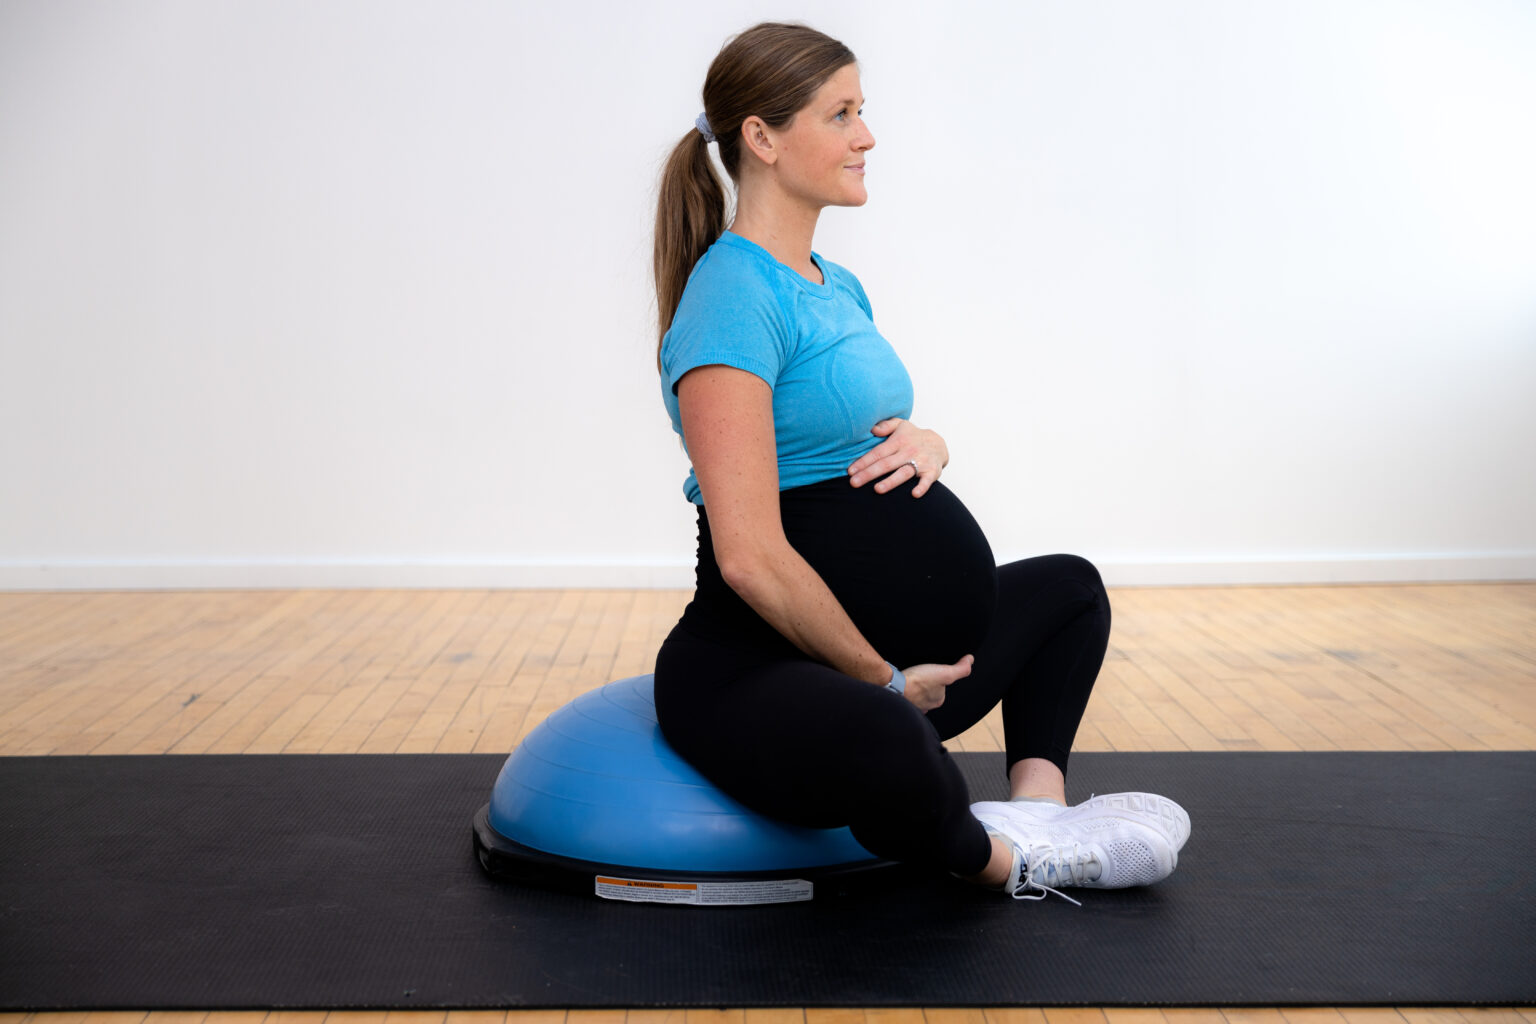 8 Exercises To Induce Labor Video Nourish Move Love 